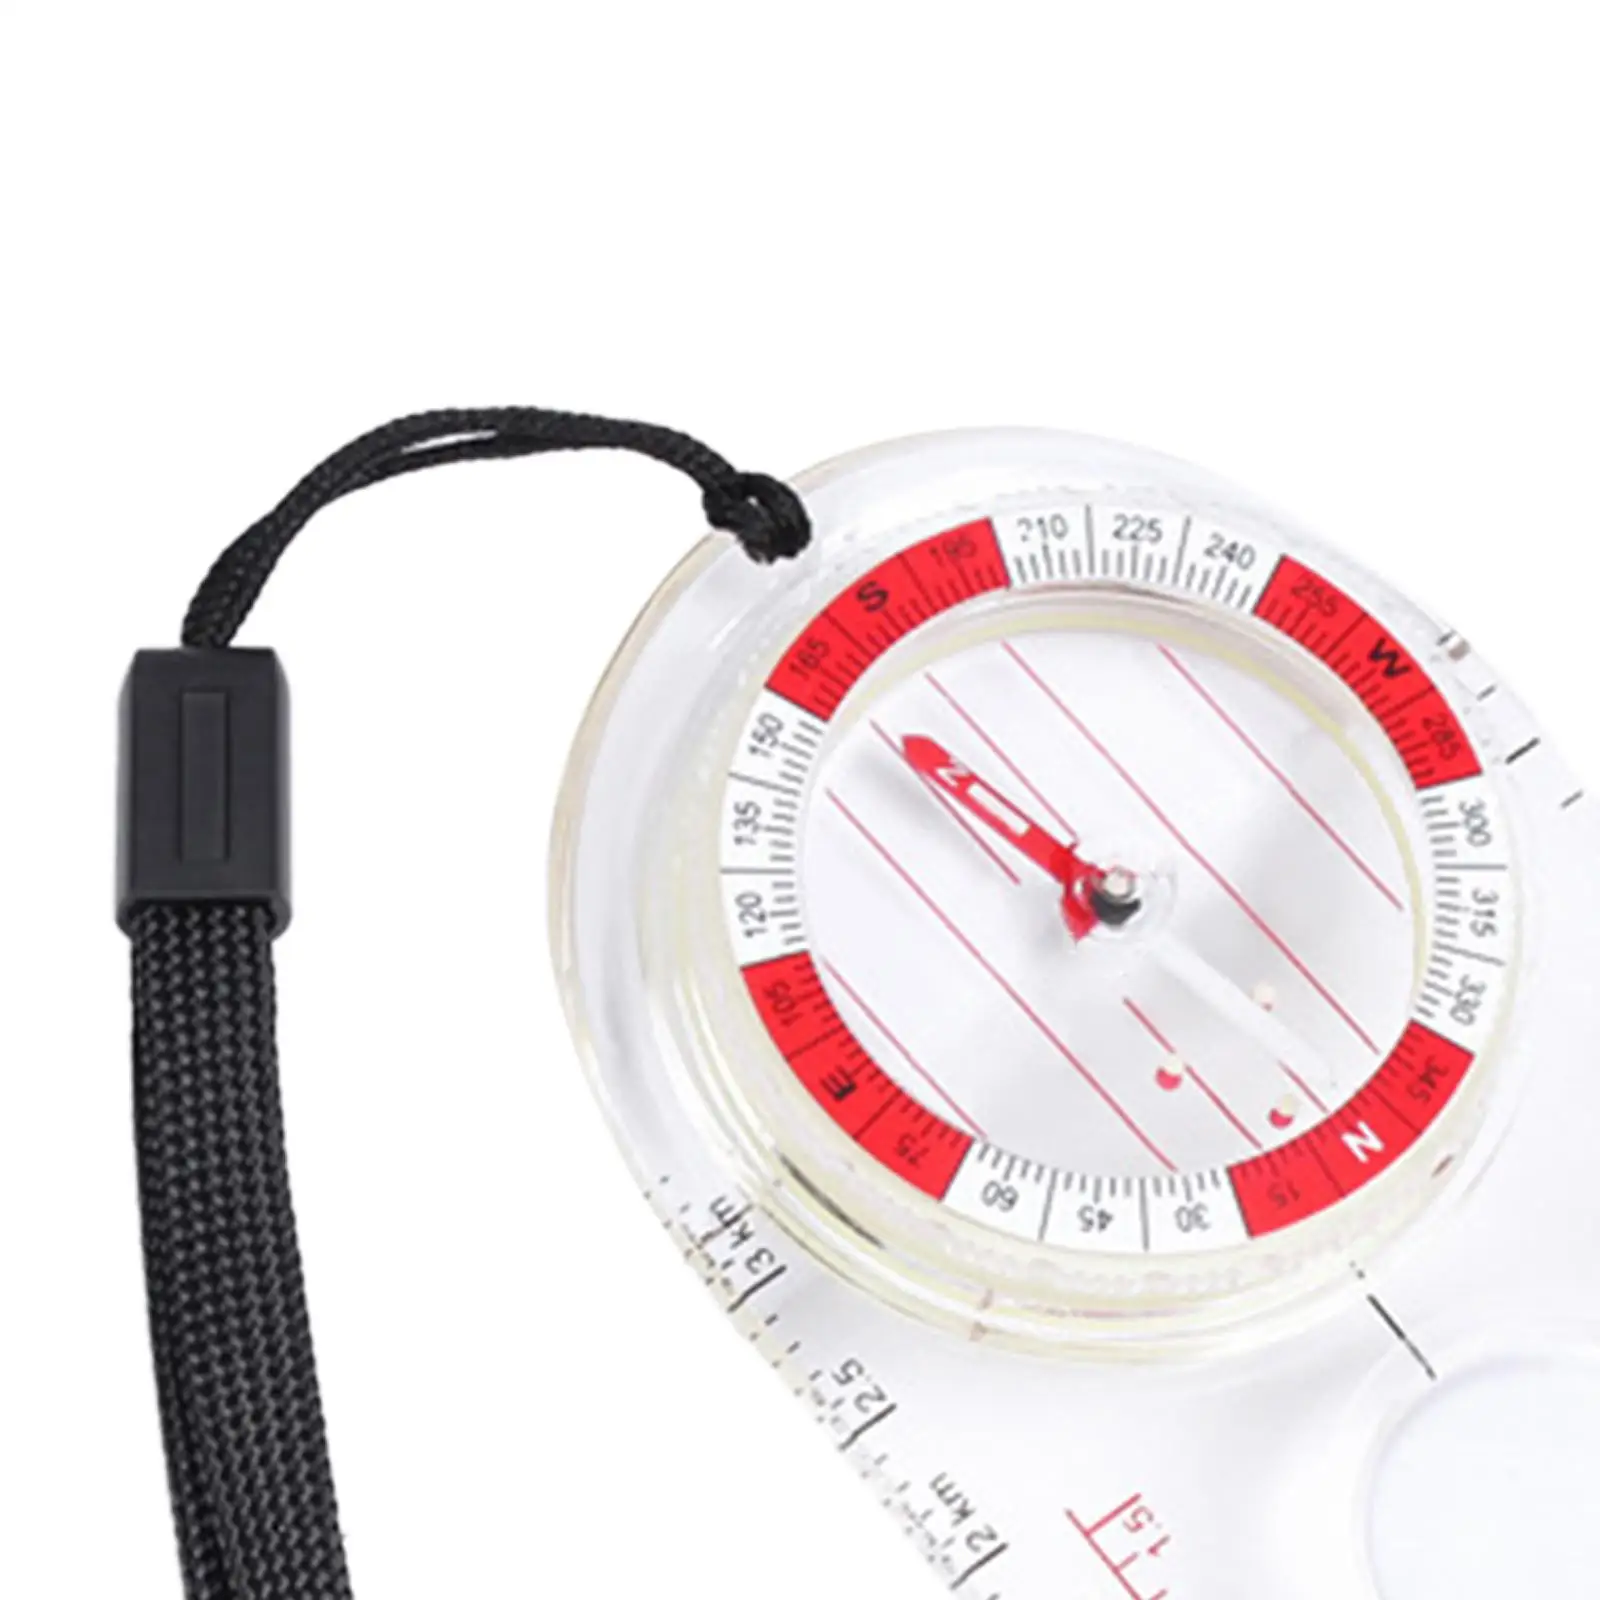 Orienteering Compass with Luminous Point Transparent Acrylic Compass Scale for Outdoor Sports Reading Survival